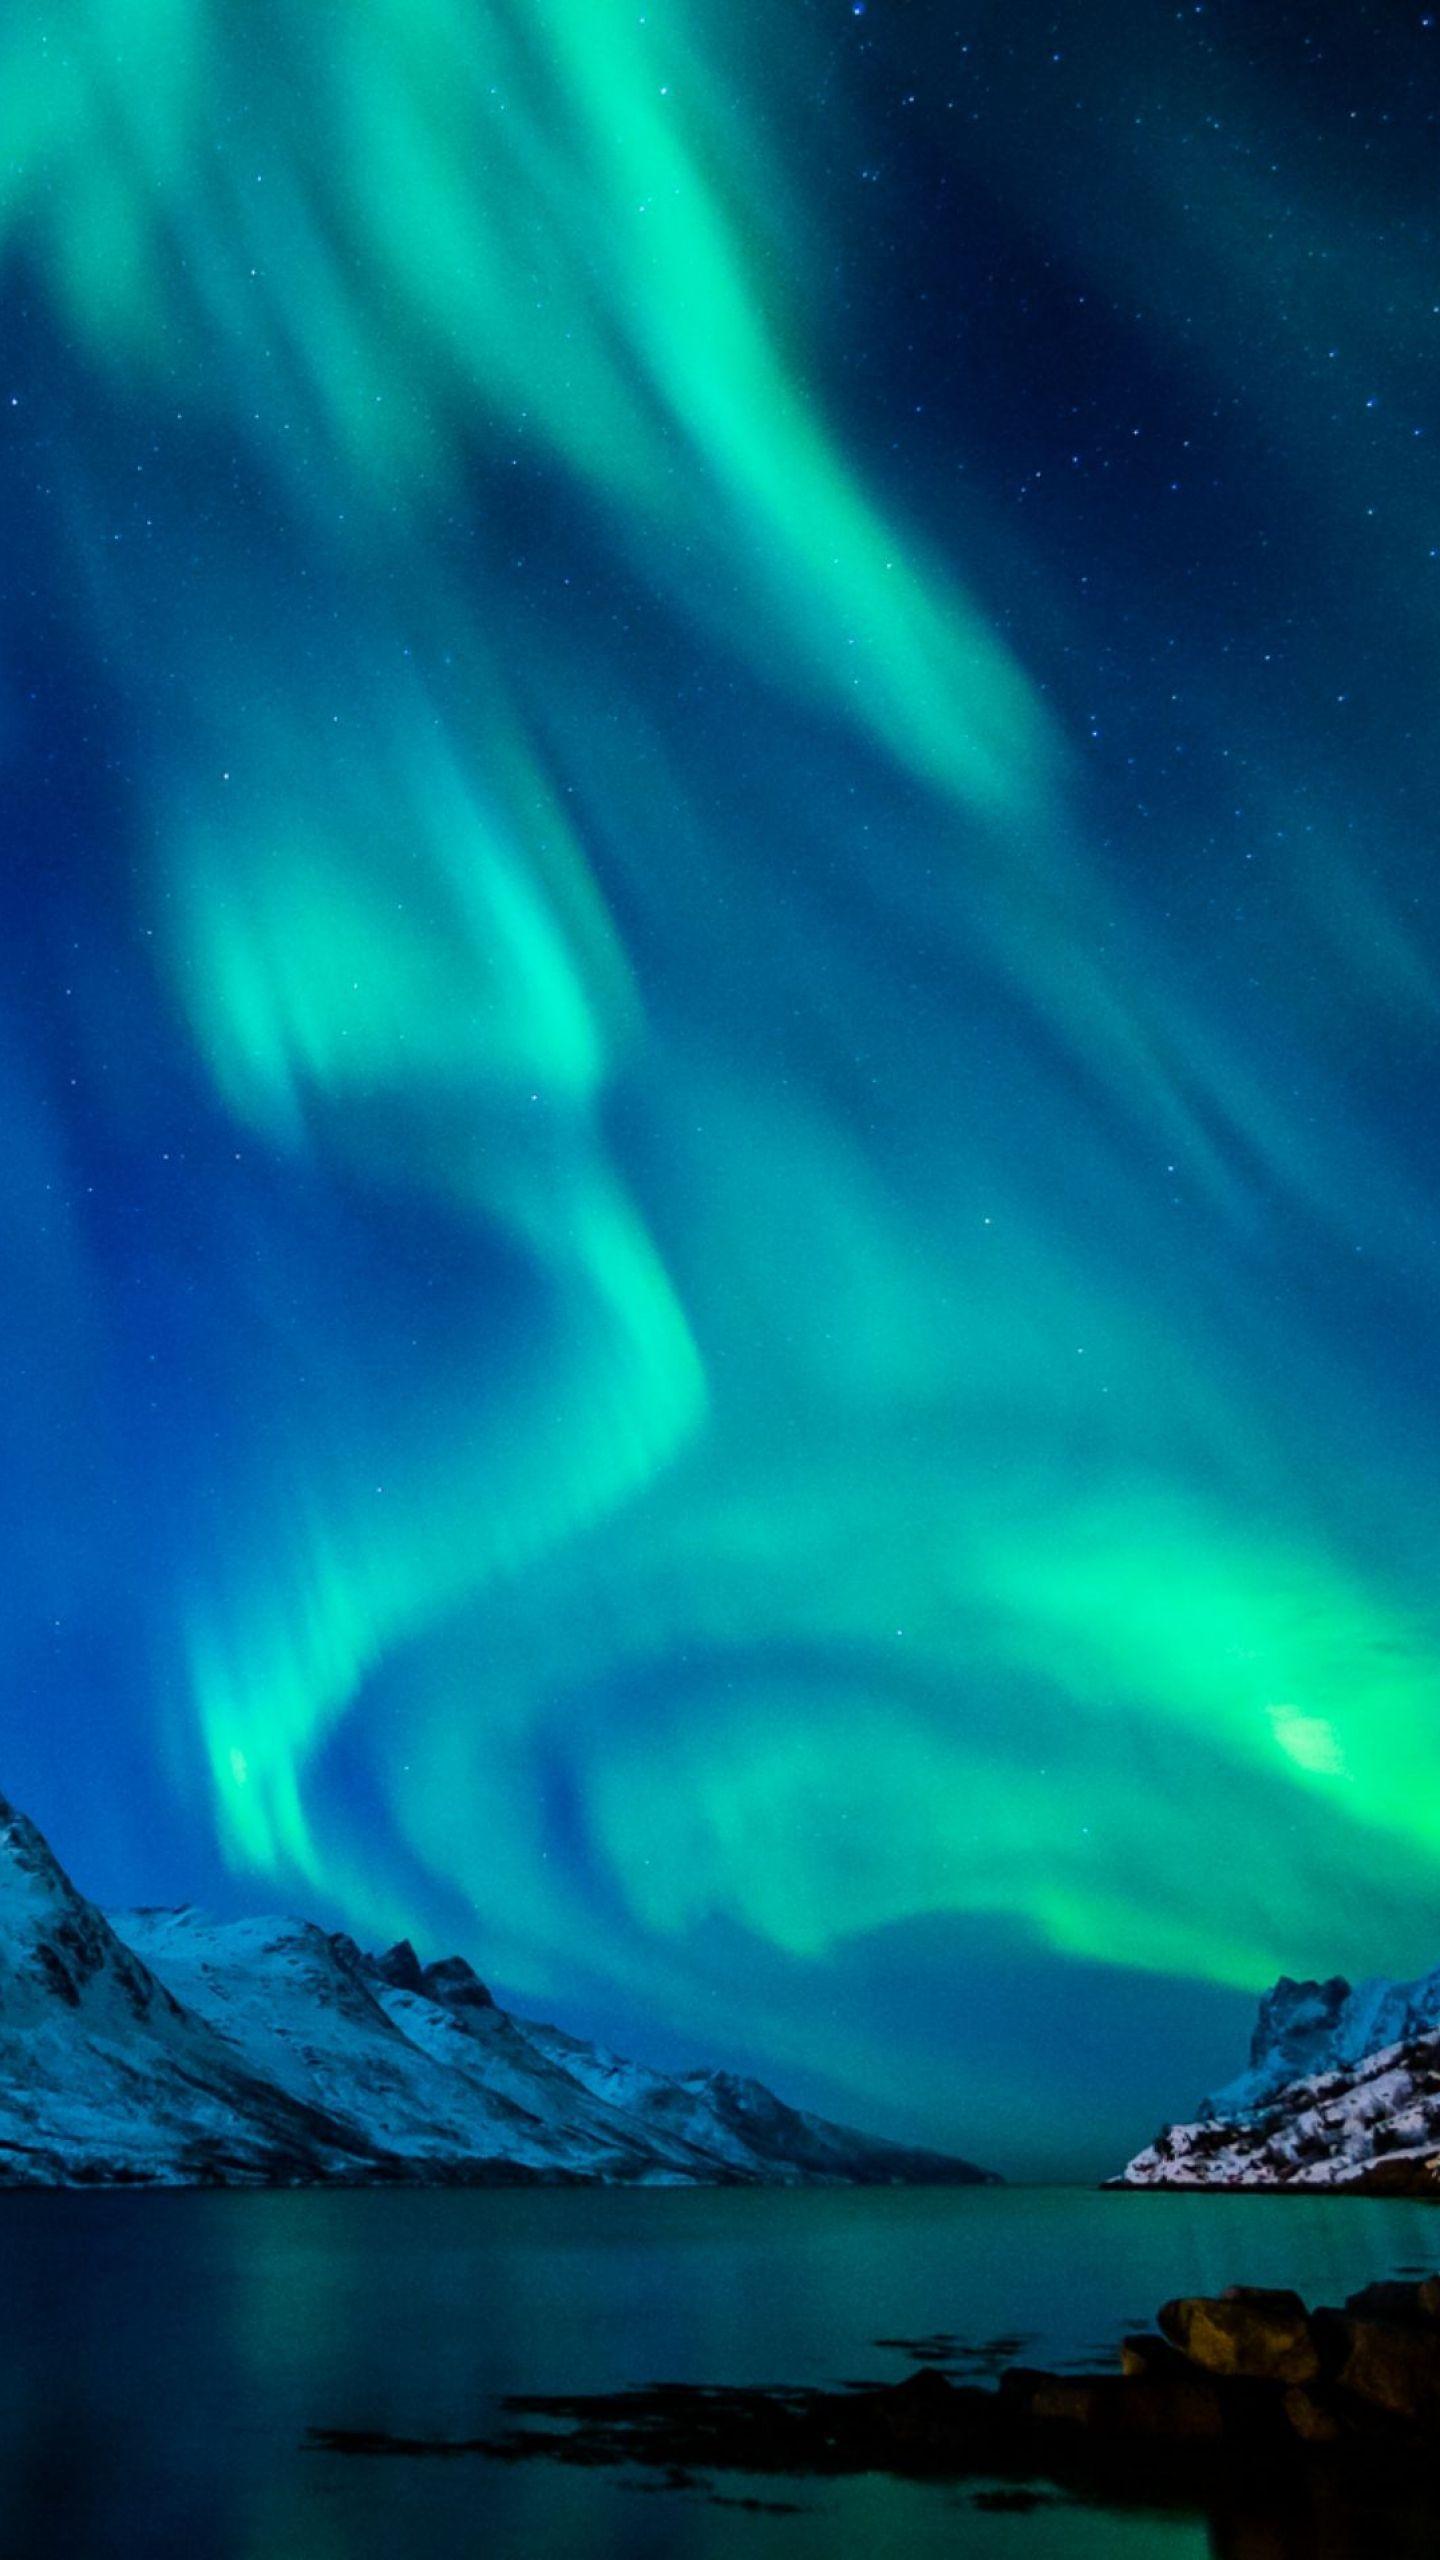 Northern Lights iPhone Wallpaper. Northern lights wallpaper, Northern lights, Aurora boreal